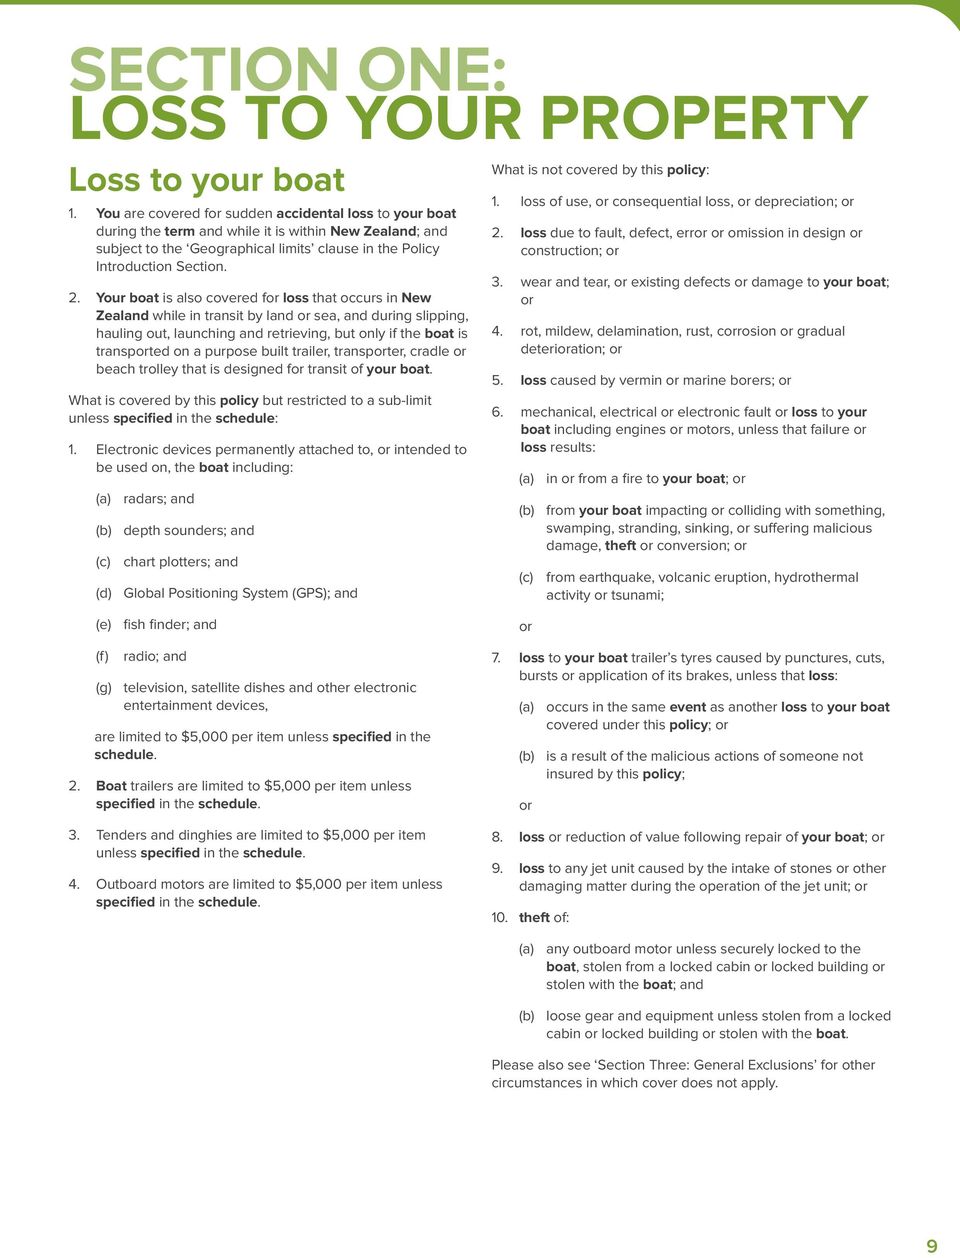 Your boat is also covered for loss that occurs in New Zealand while in transit by land or sea, and during slipping, hauling out, launching and retrieving, but only if the boat is transported on a